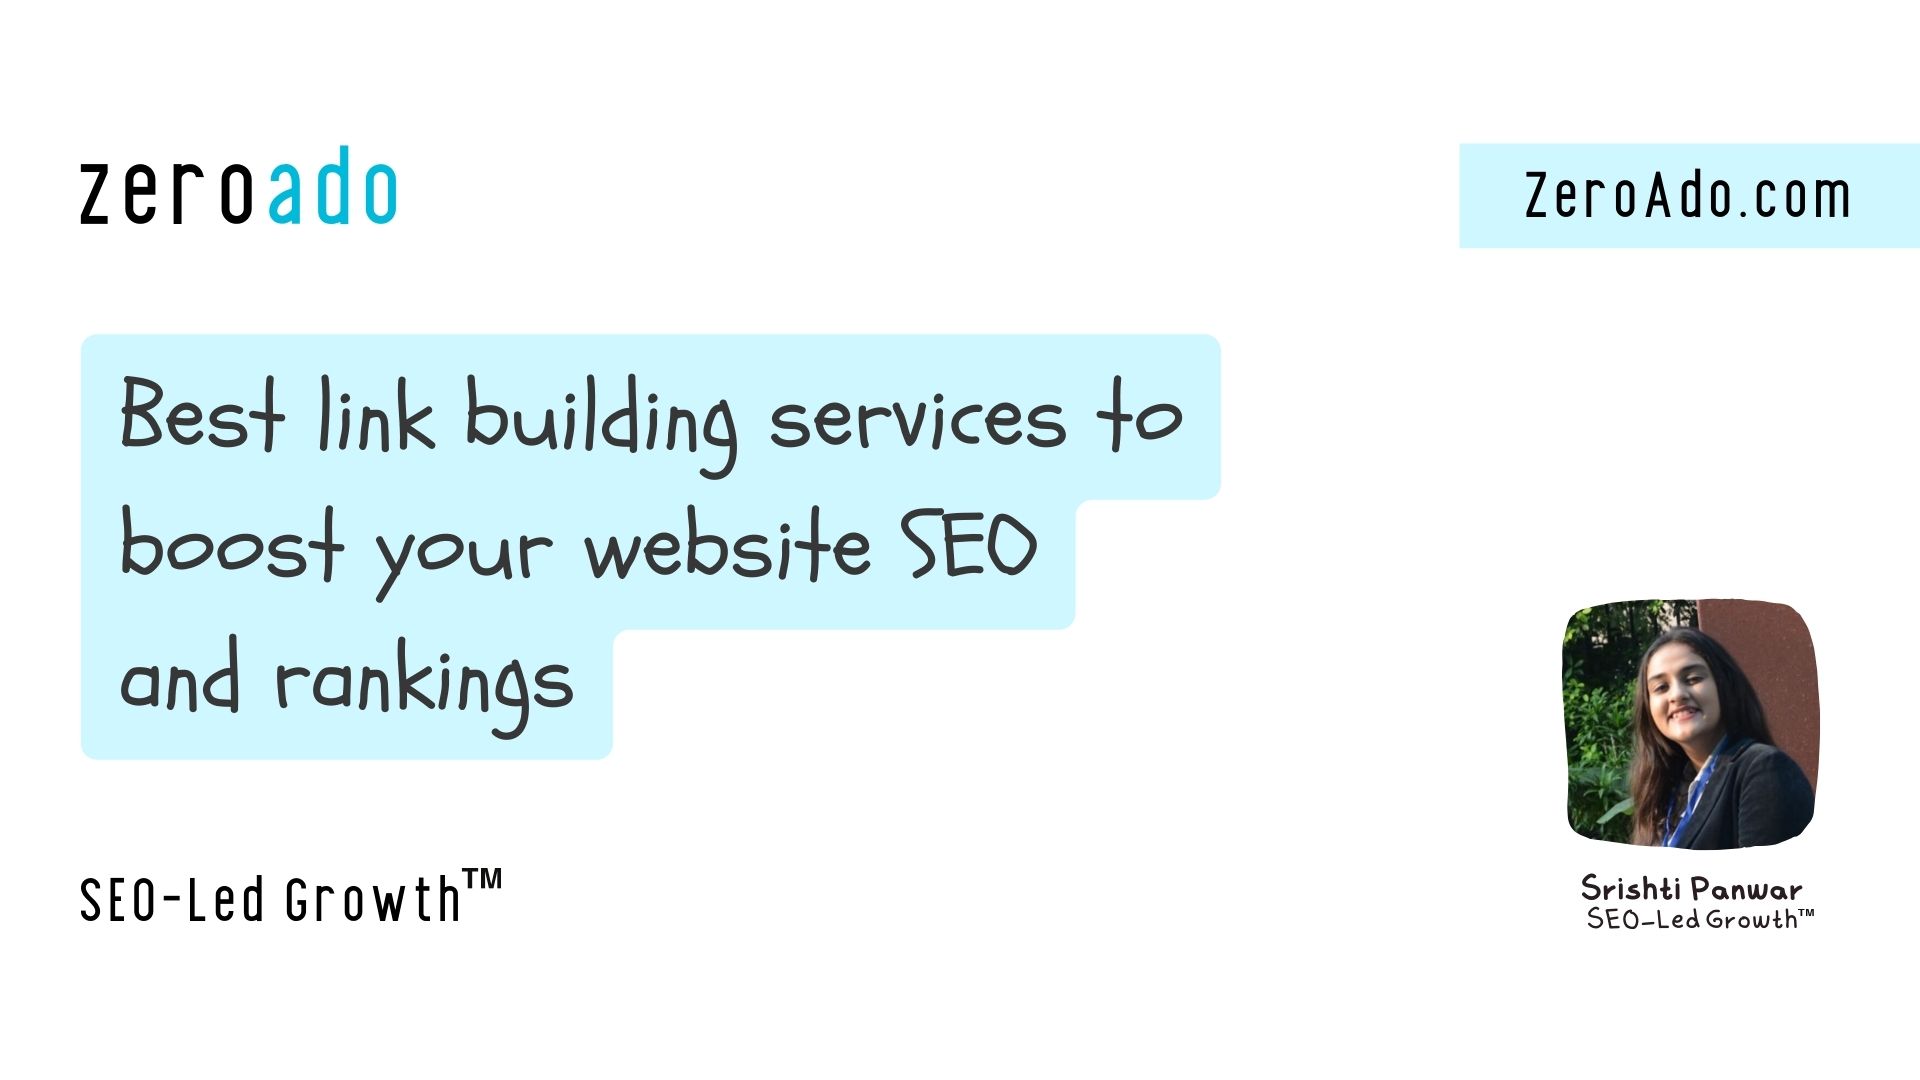 Best link building services to boost your website SEO and rankings.